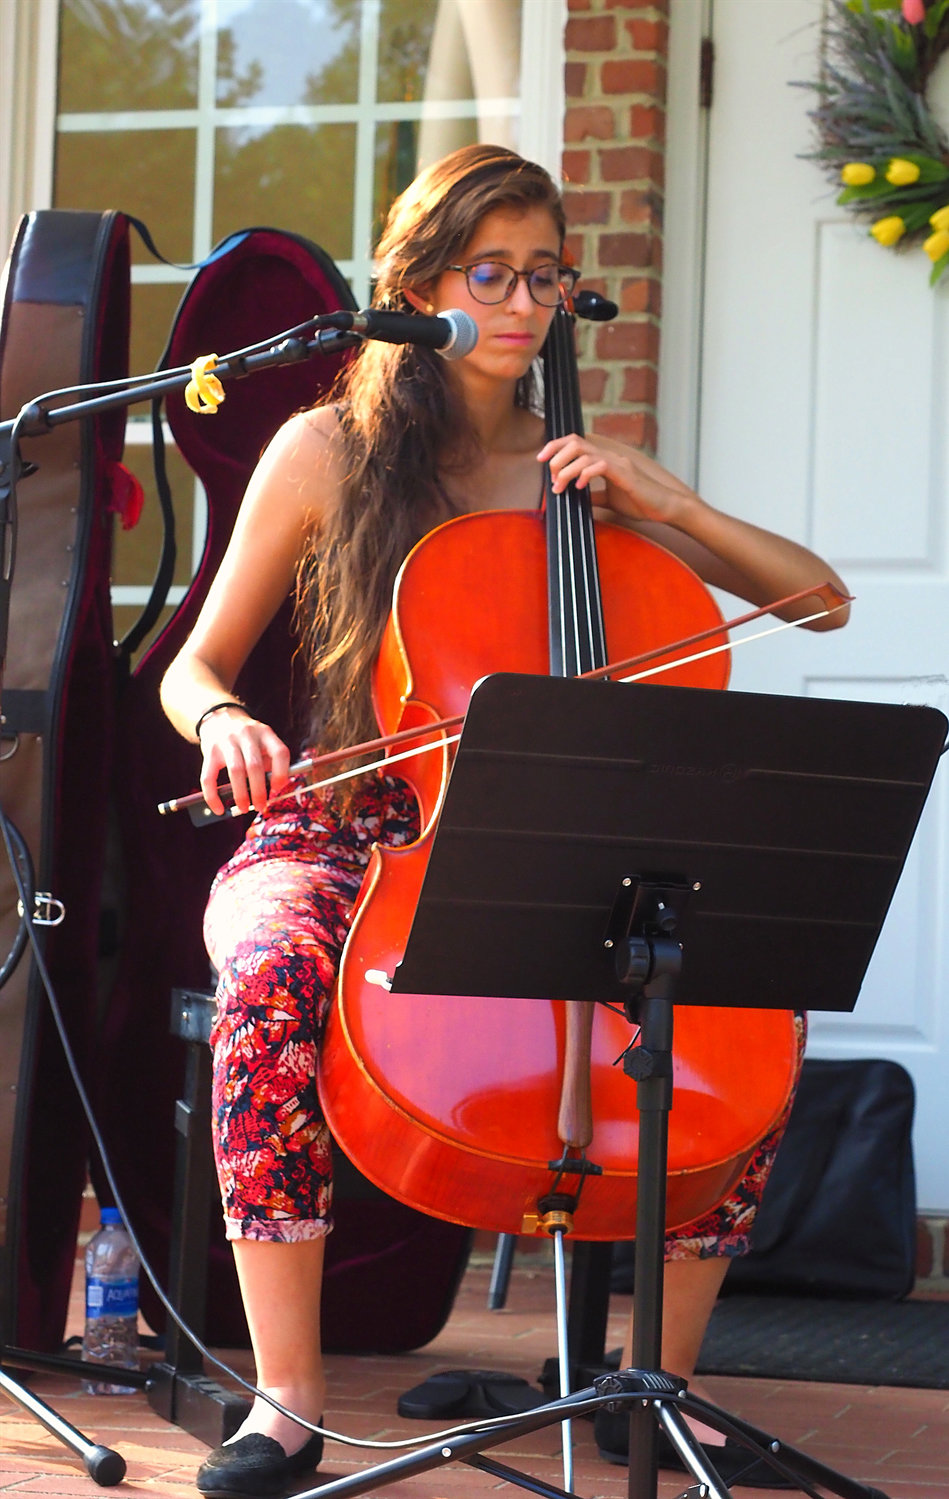 Cellist Sara Vaca plays a set at Cedar Grove UMC's first 'summer fiesta' last Saturday. She, along with various other local artists provided live music for the fiesta.